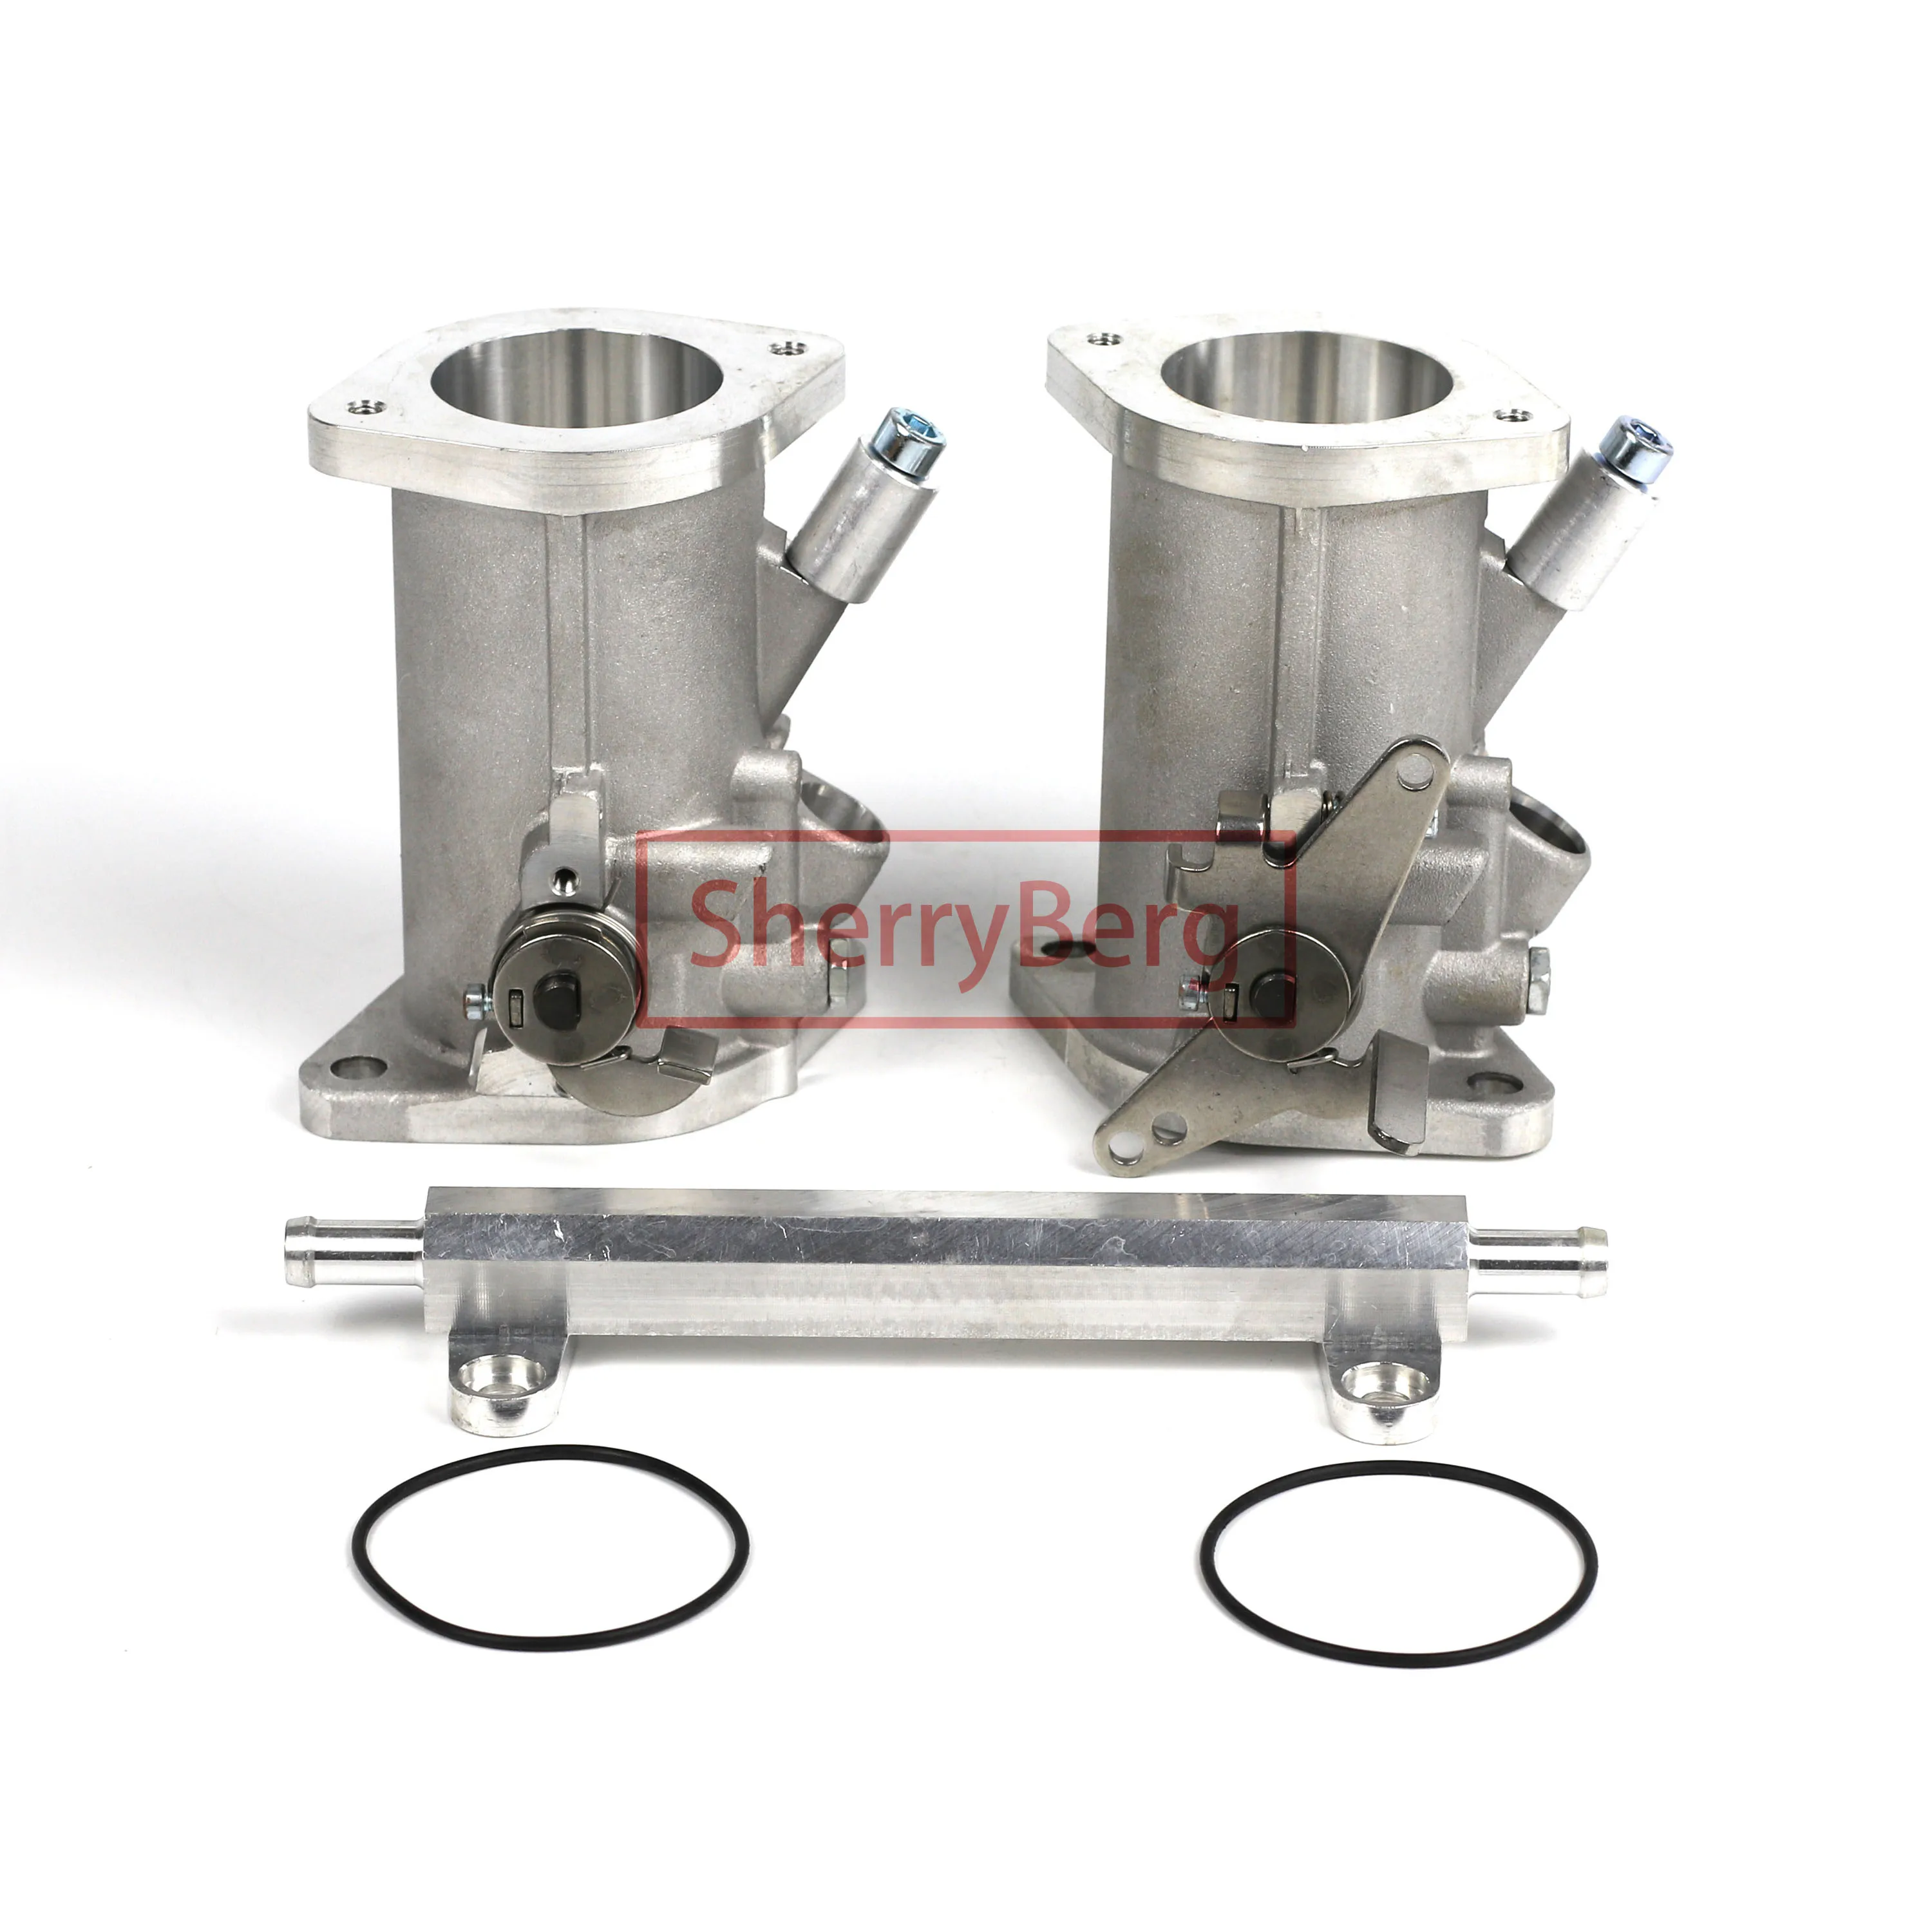 

SherryBerg FAJS throttle body 45IDA Throttle Bodies replace 45mm Weber dellorto carb Fit 1600cc Injectors(not included injector)